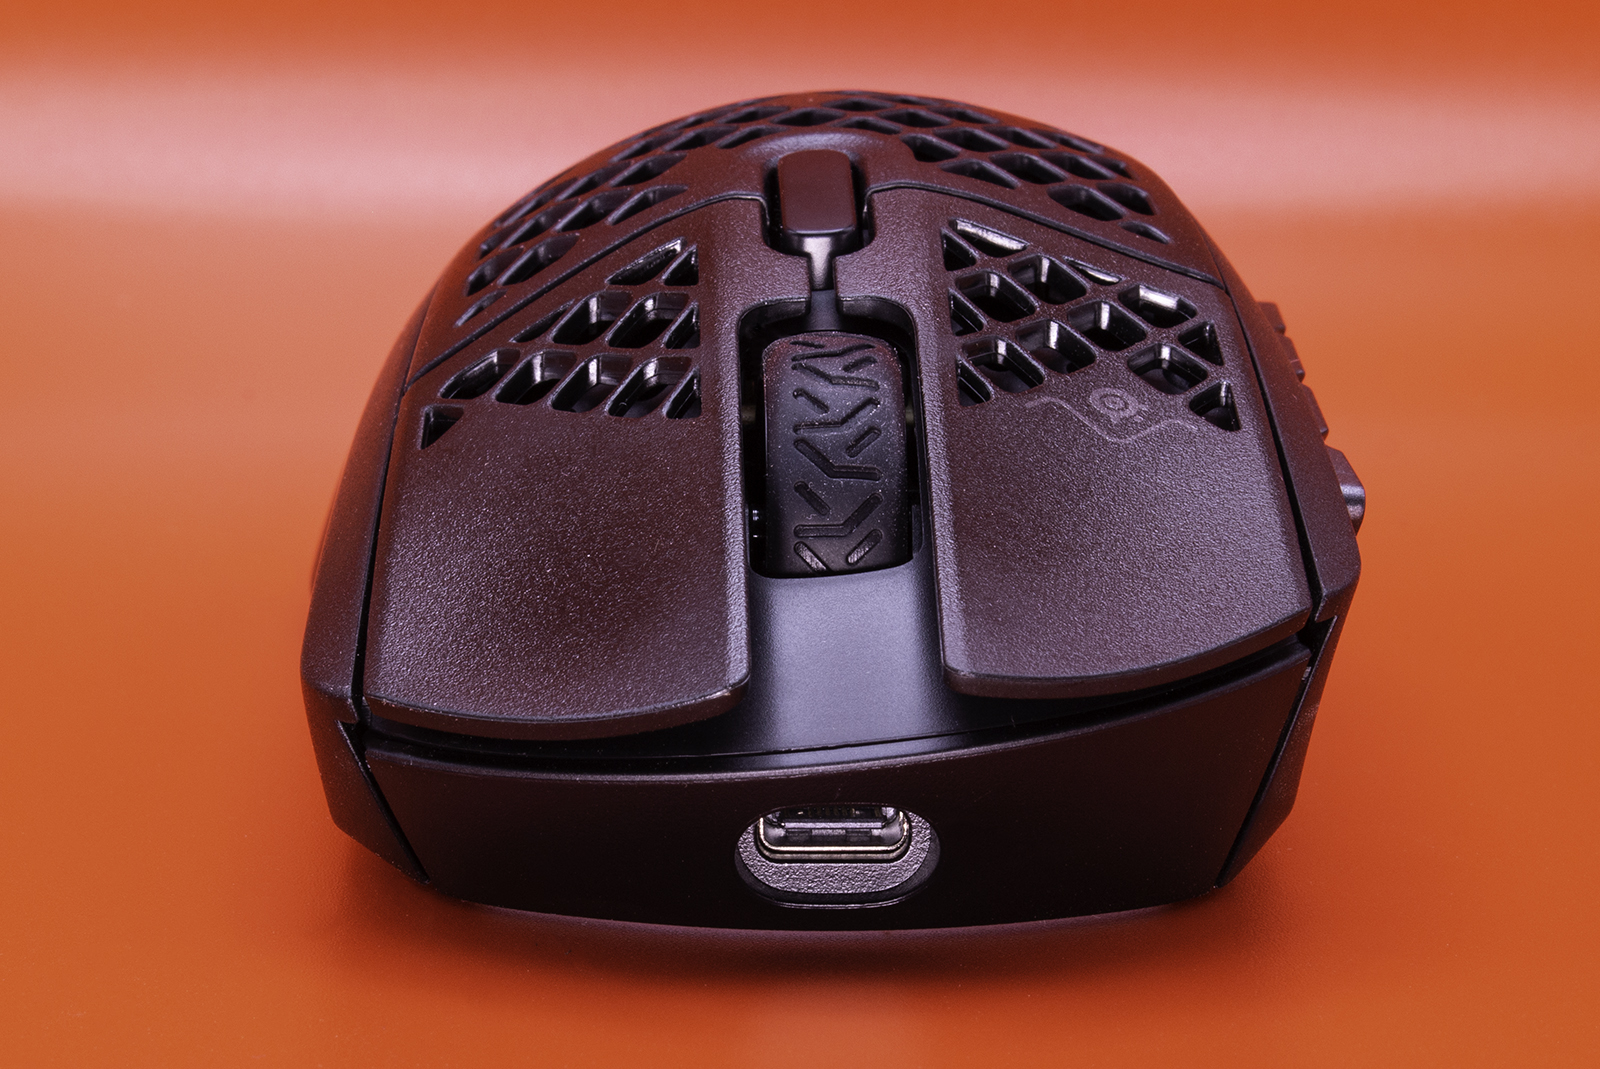 SteelSeries Aerox 9 Wireless review: The best MMO/MOBA mouse you